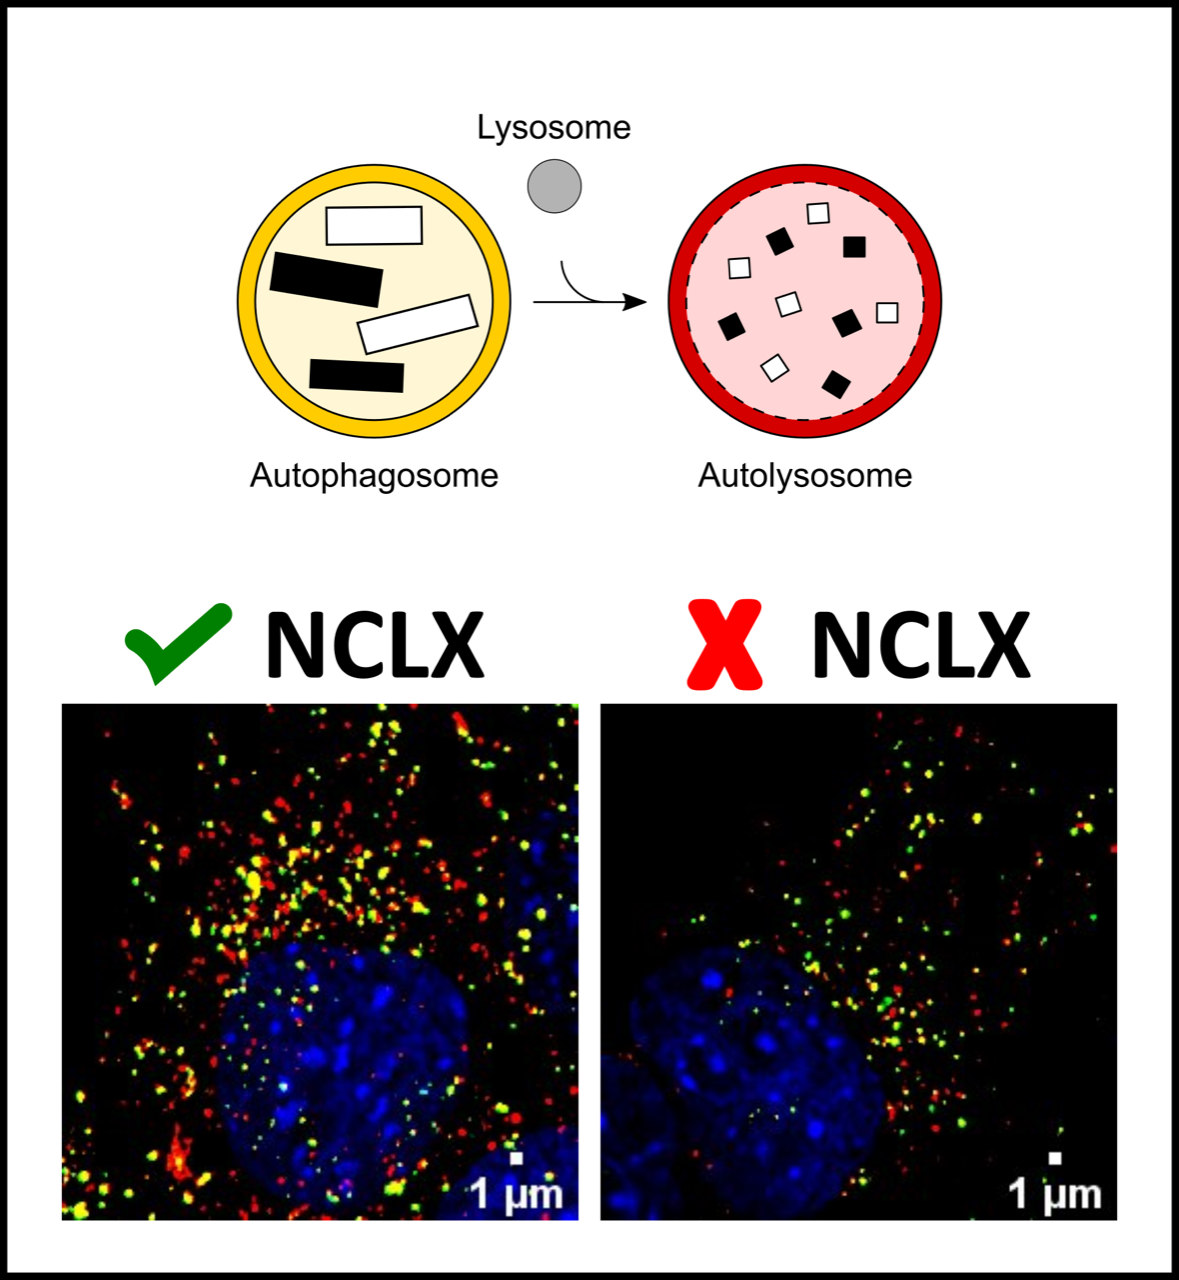 Inhibition of the mitochondrial calcium transporter, NCLX, compromises autophagy in cells